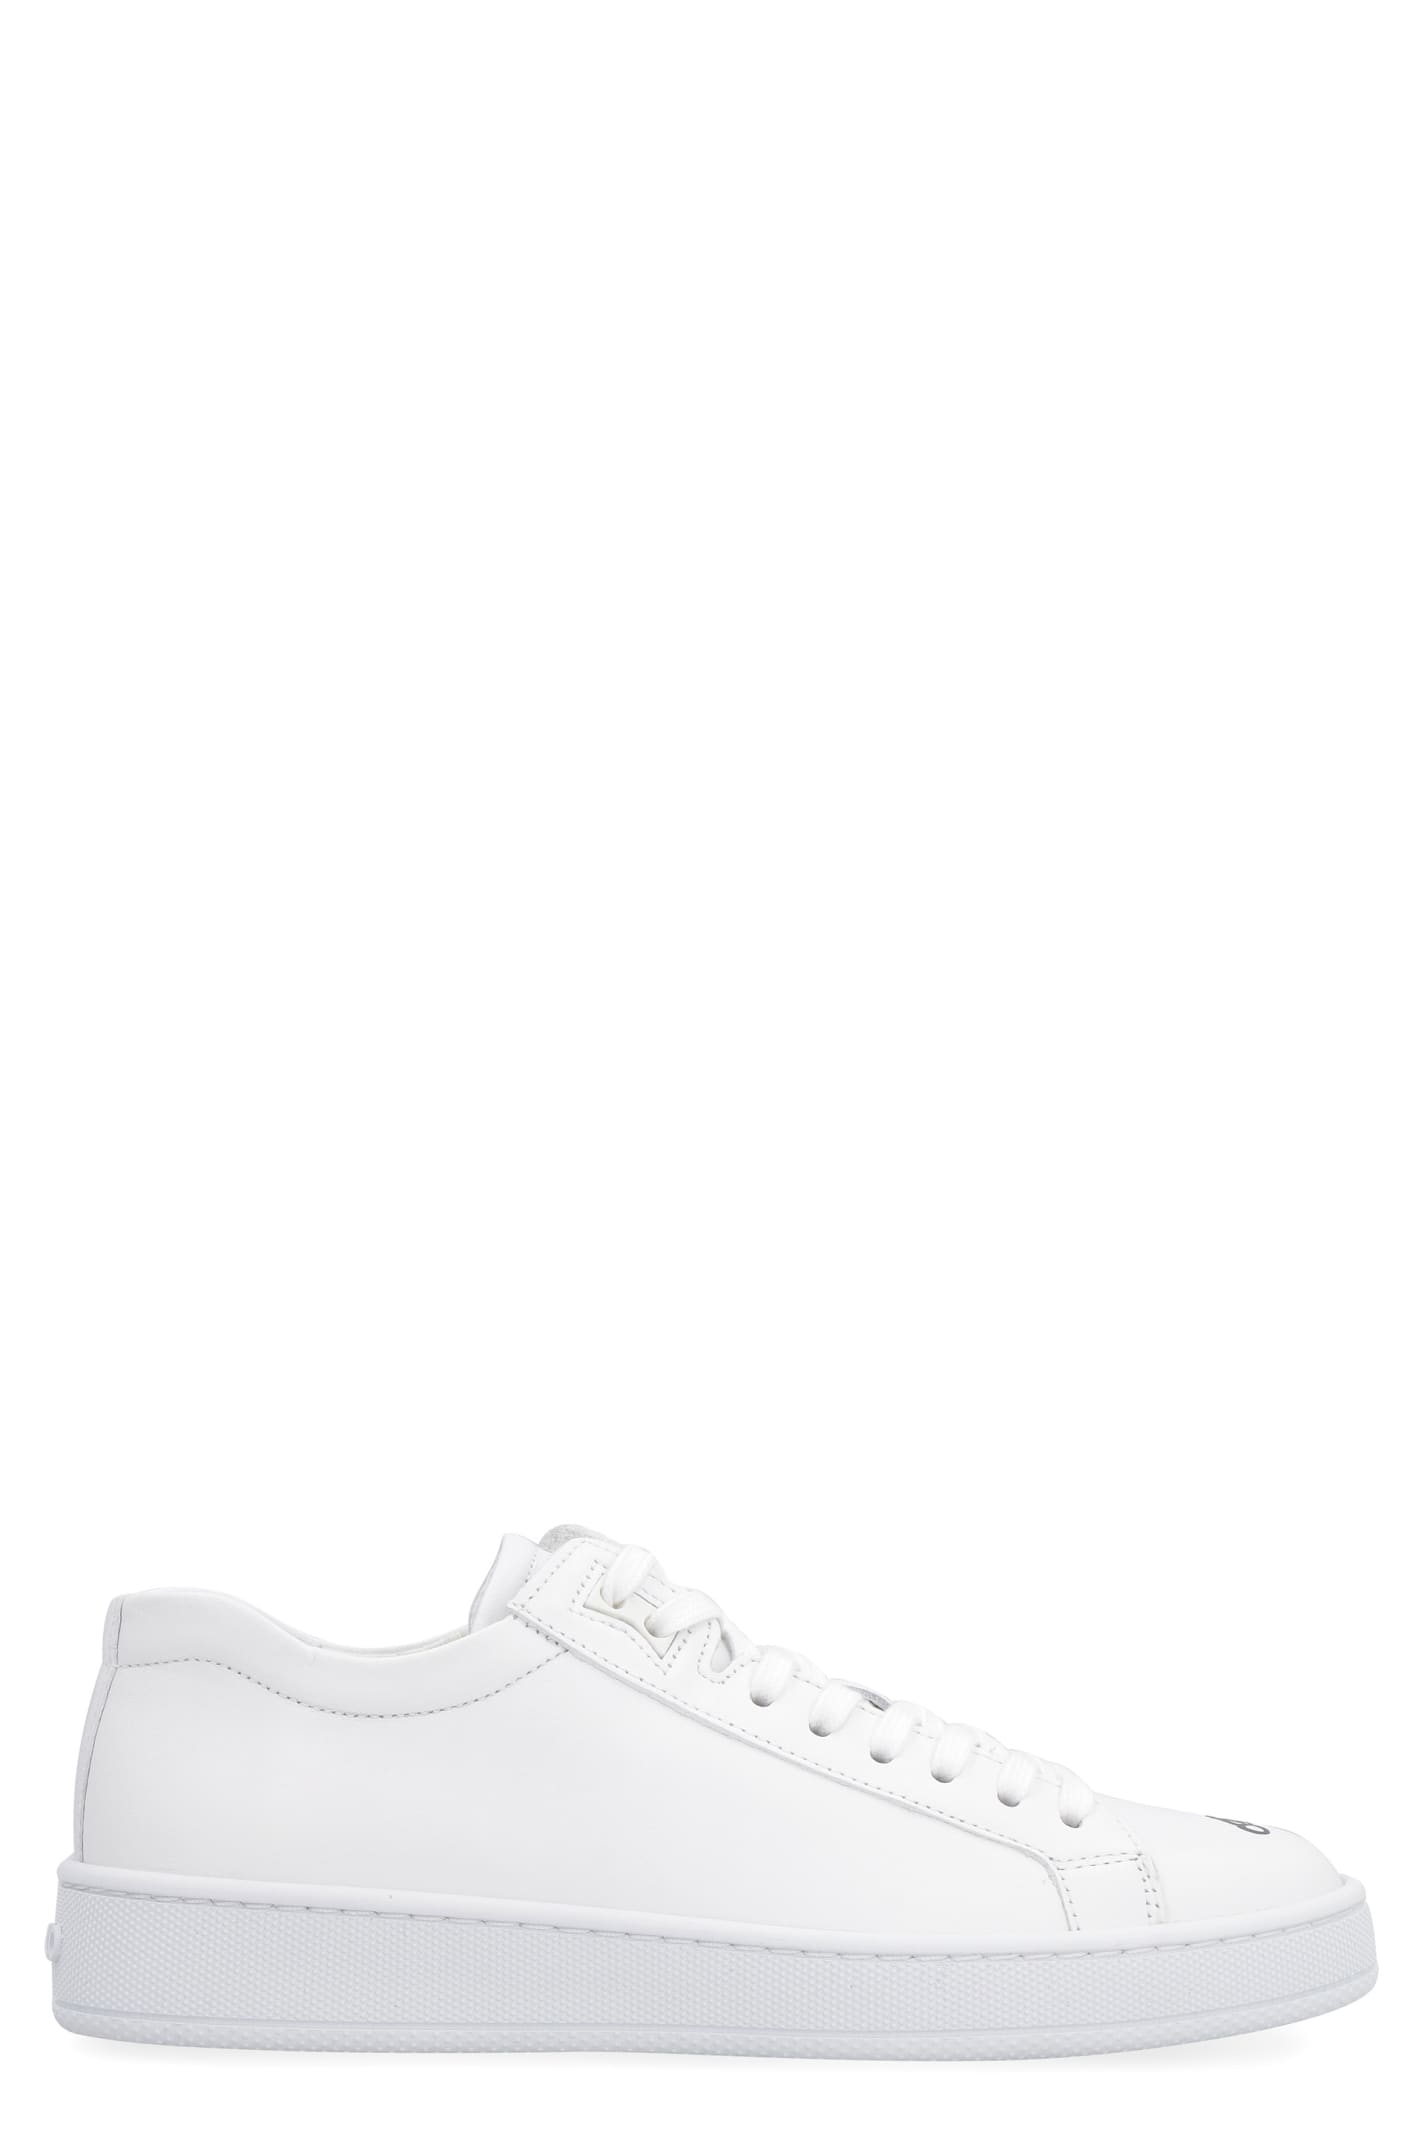 Buy Kenzo Leather Low-top Sneakers online, shop Kenzo shoes with free shipping